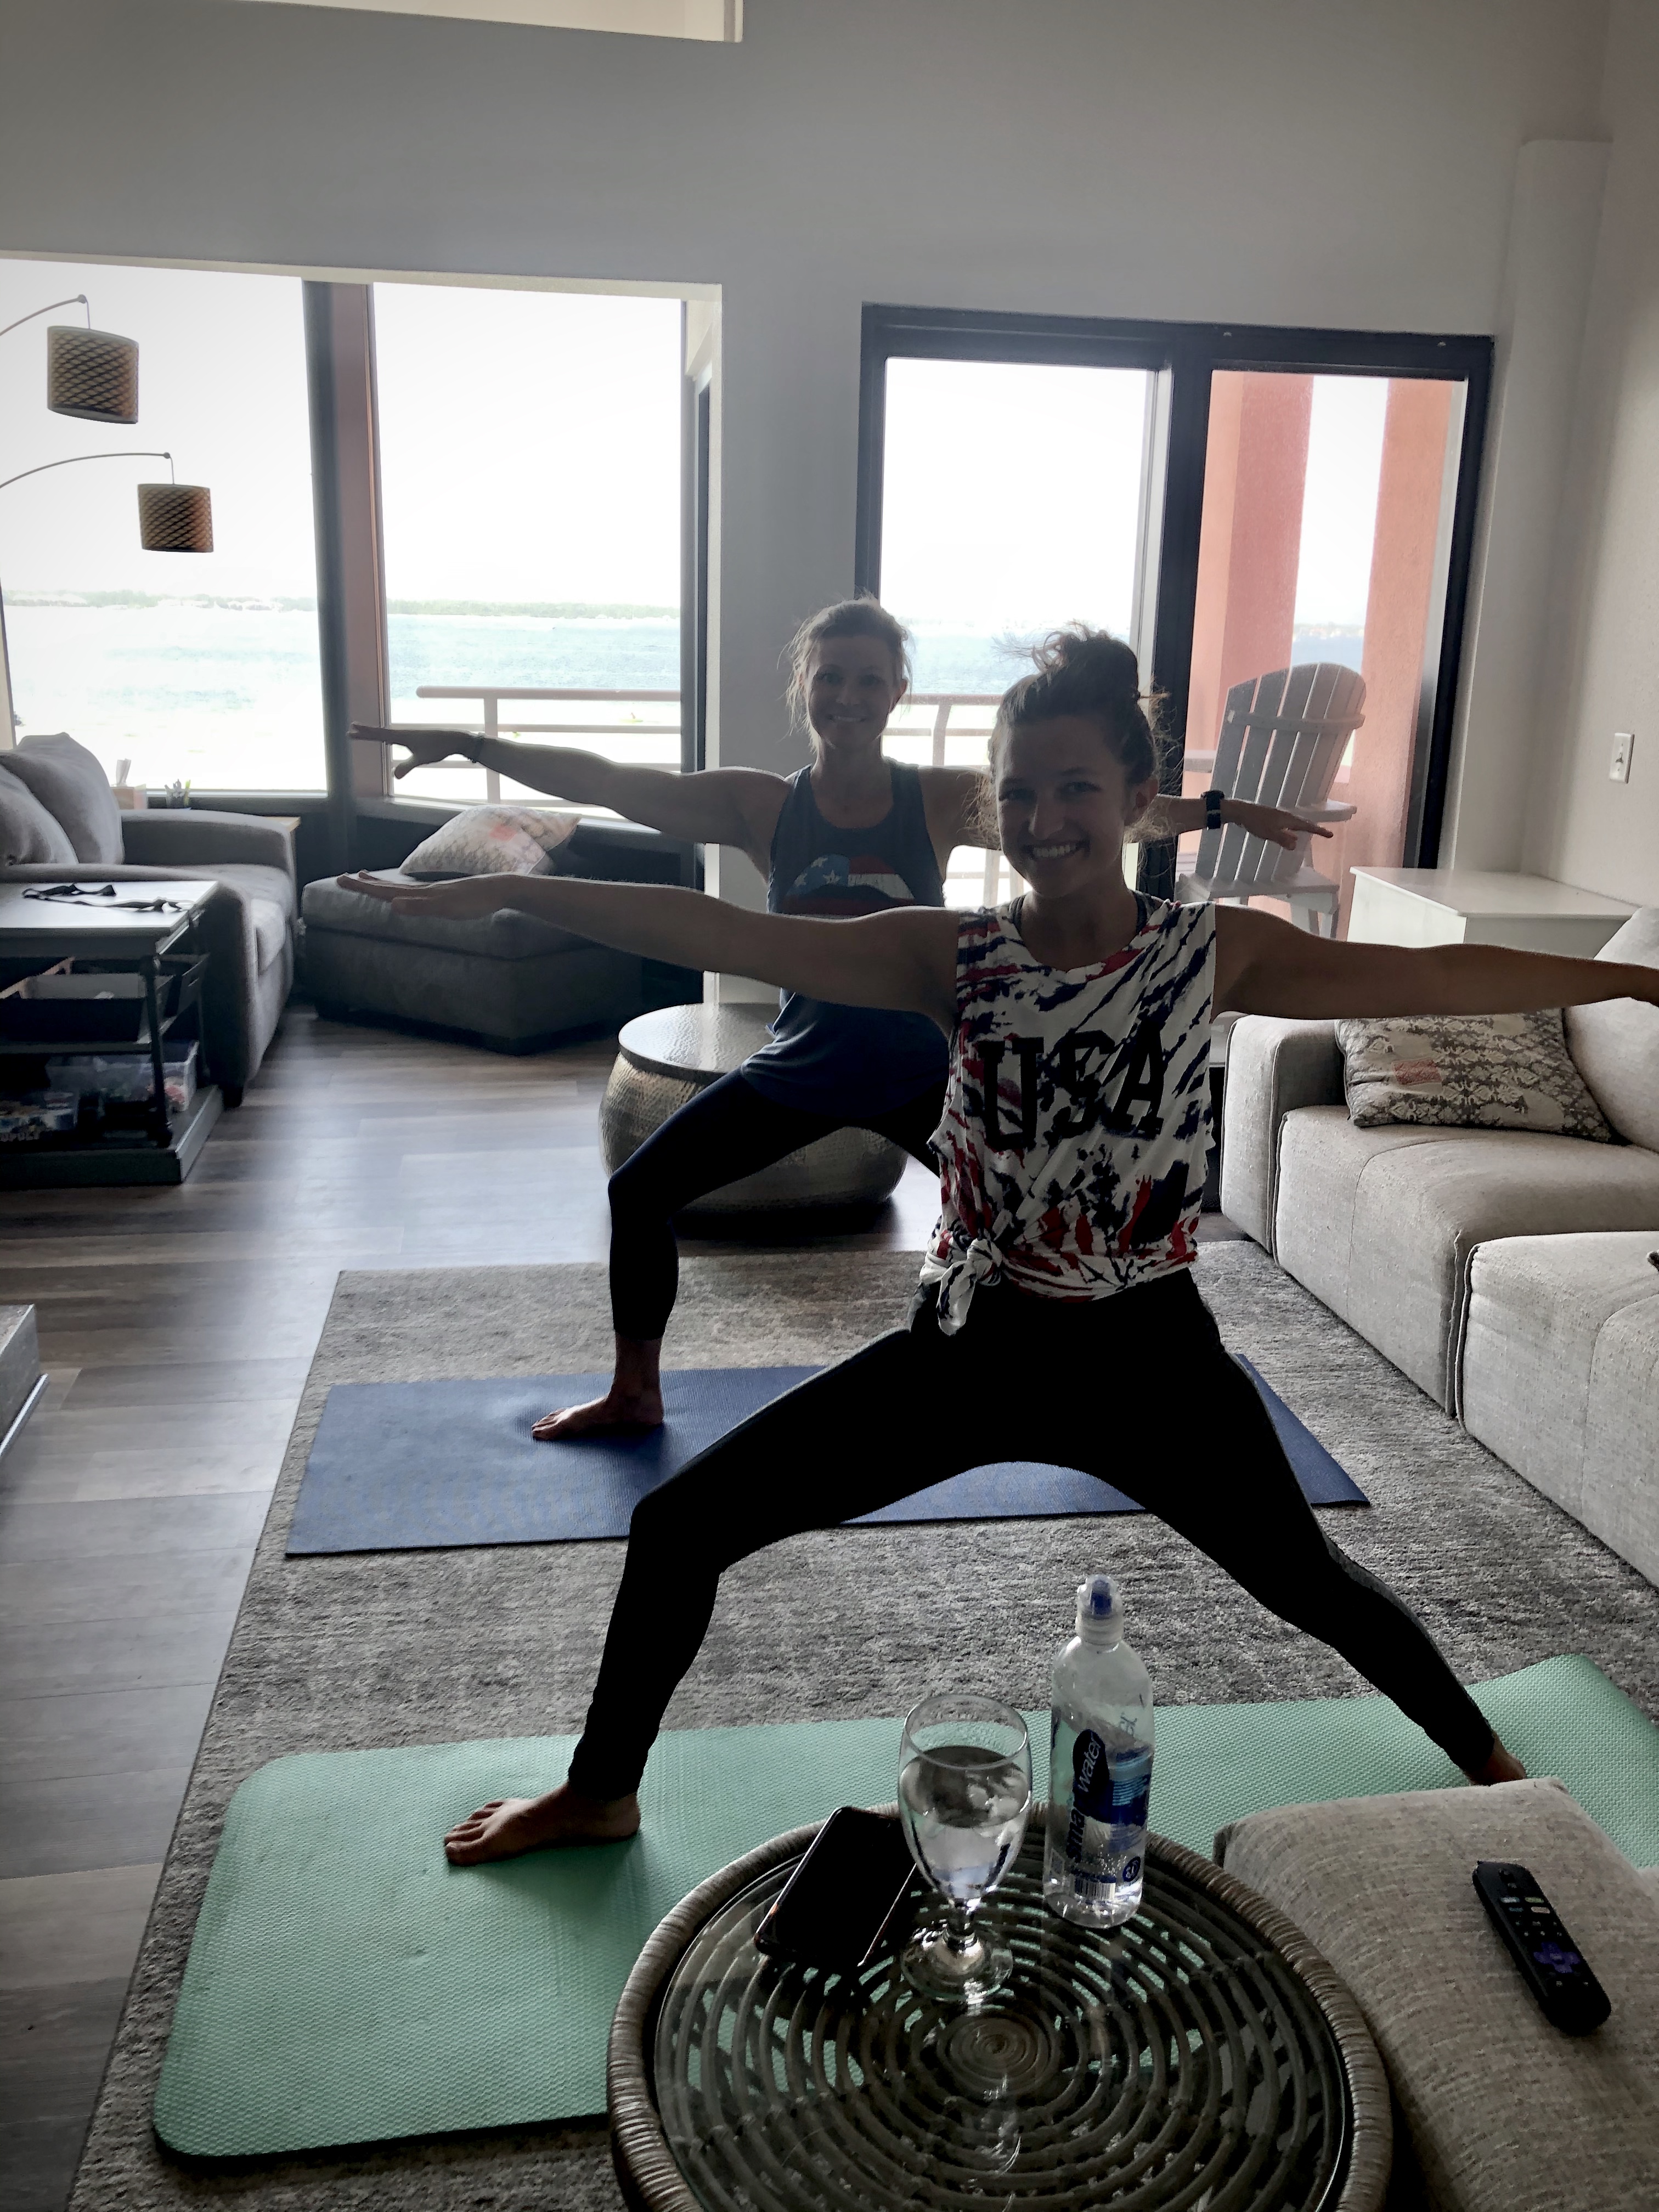 Adriene Mishler Shares What She's Learned From Teaching Yoga